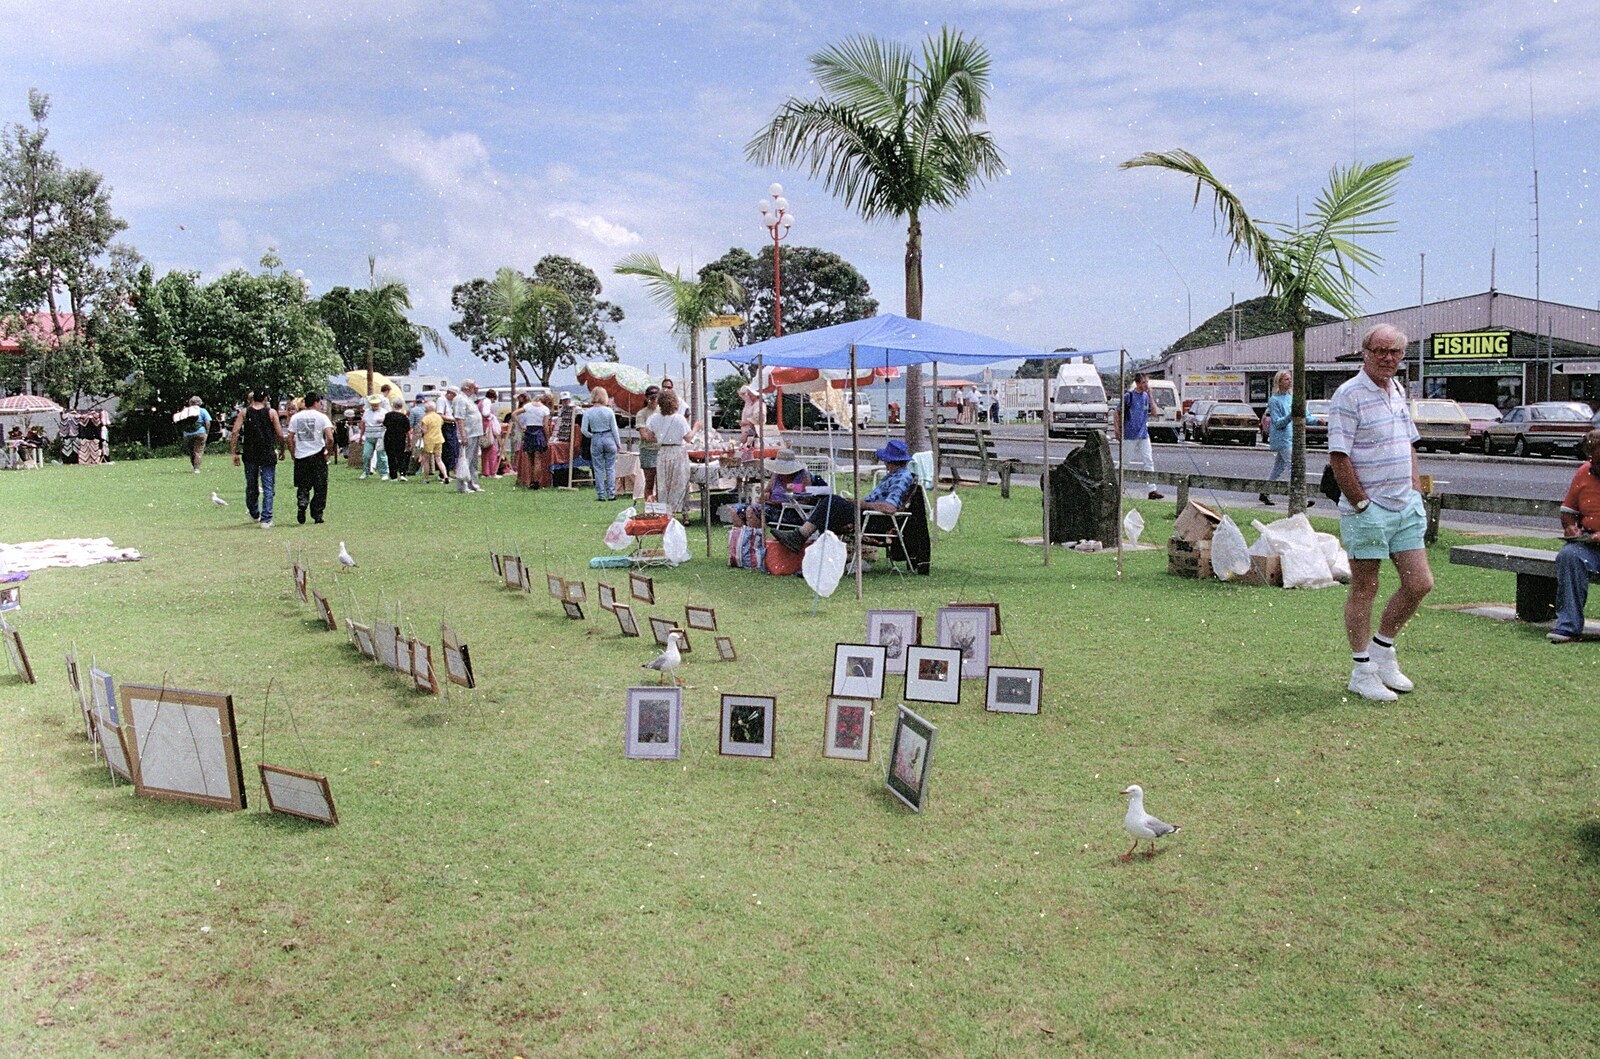 The Old Chap roams around an outdoor art sale from The Bay Of Islands, New Zealand - 29th November 1992